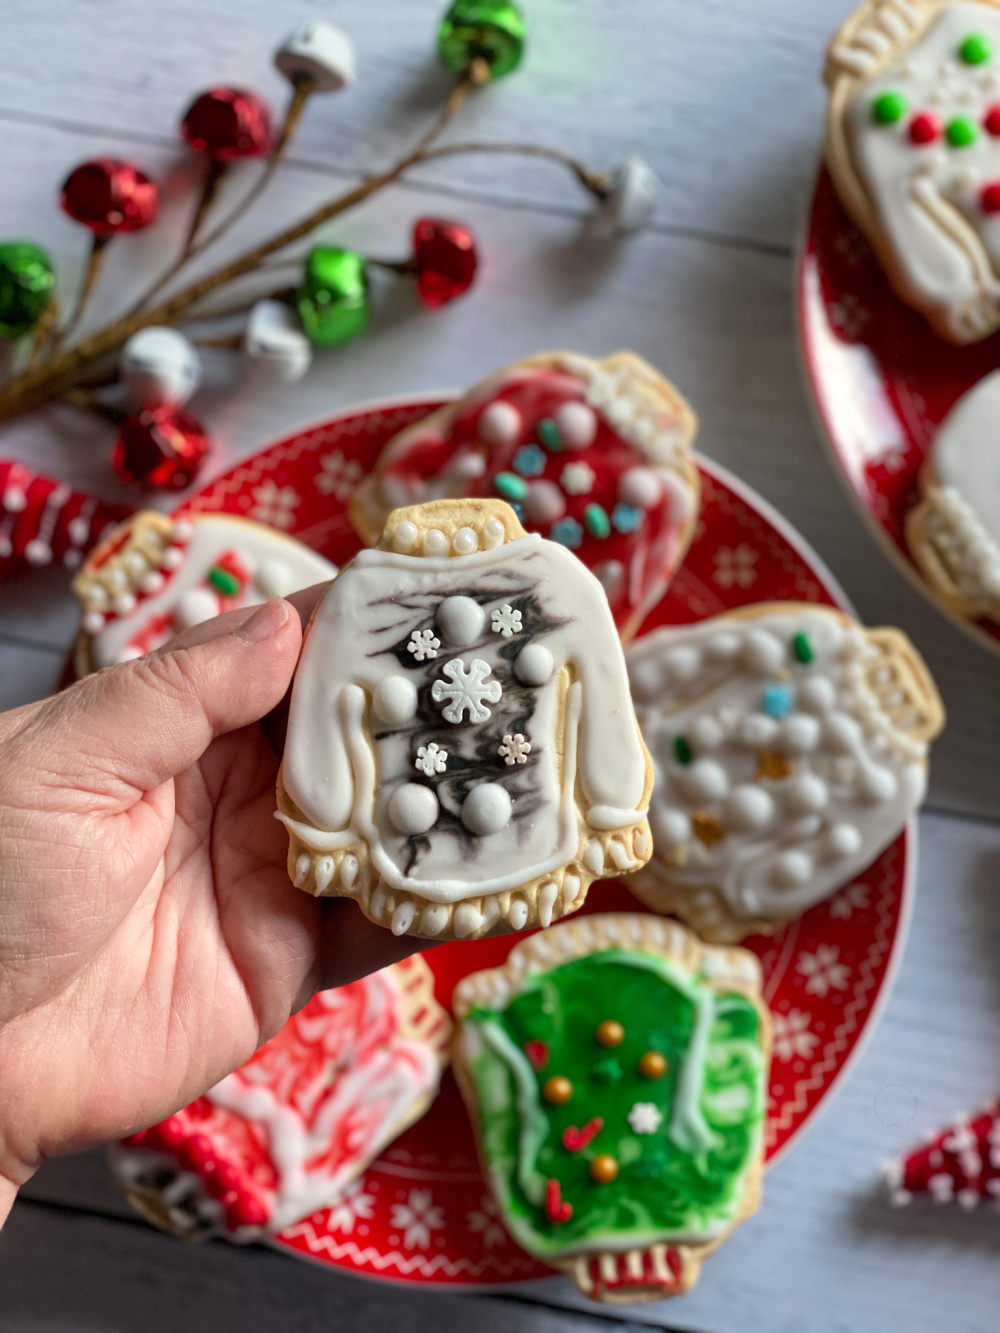 A hand holding a sugar cookie with holiday decorations